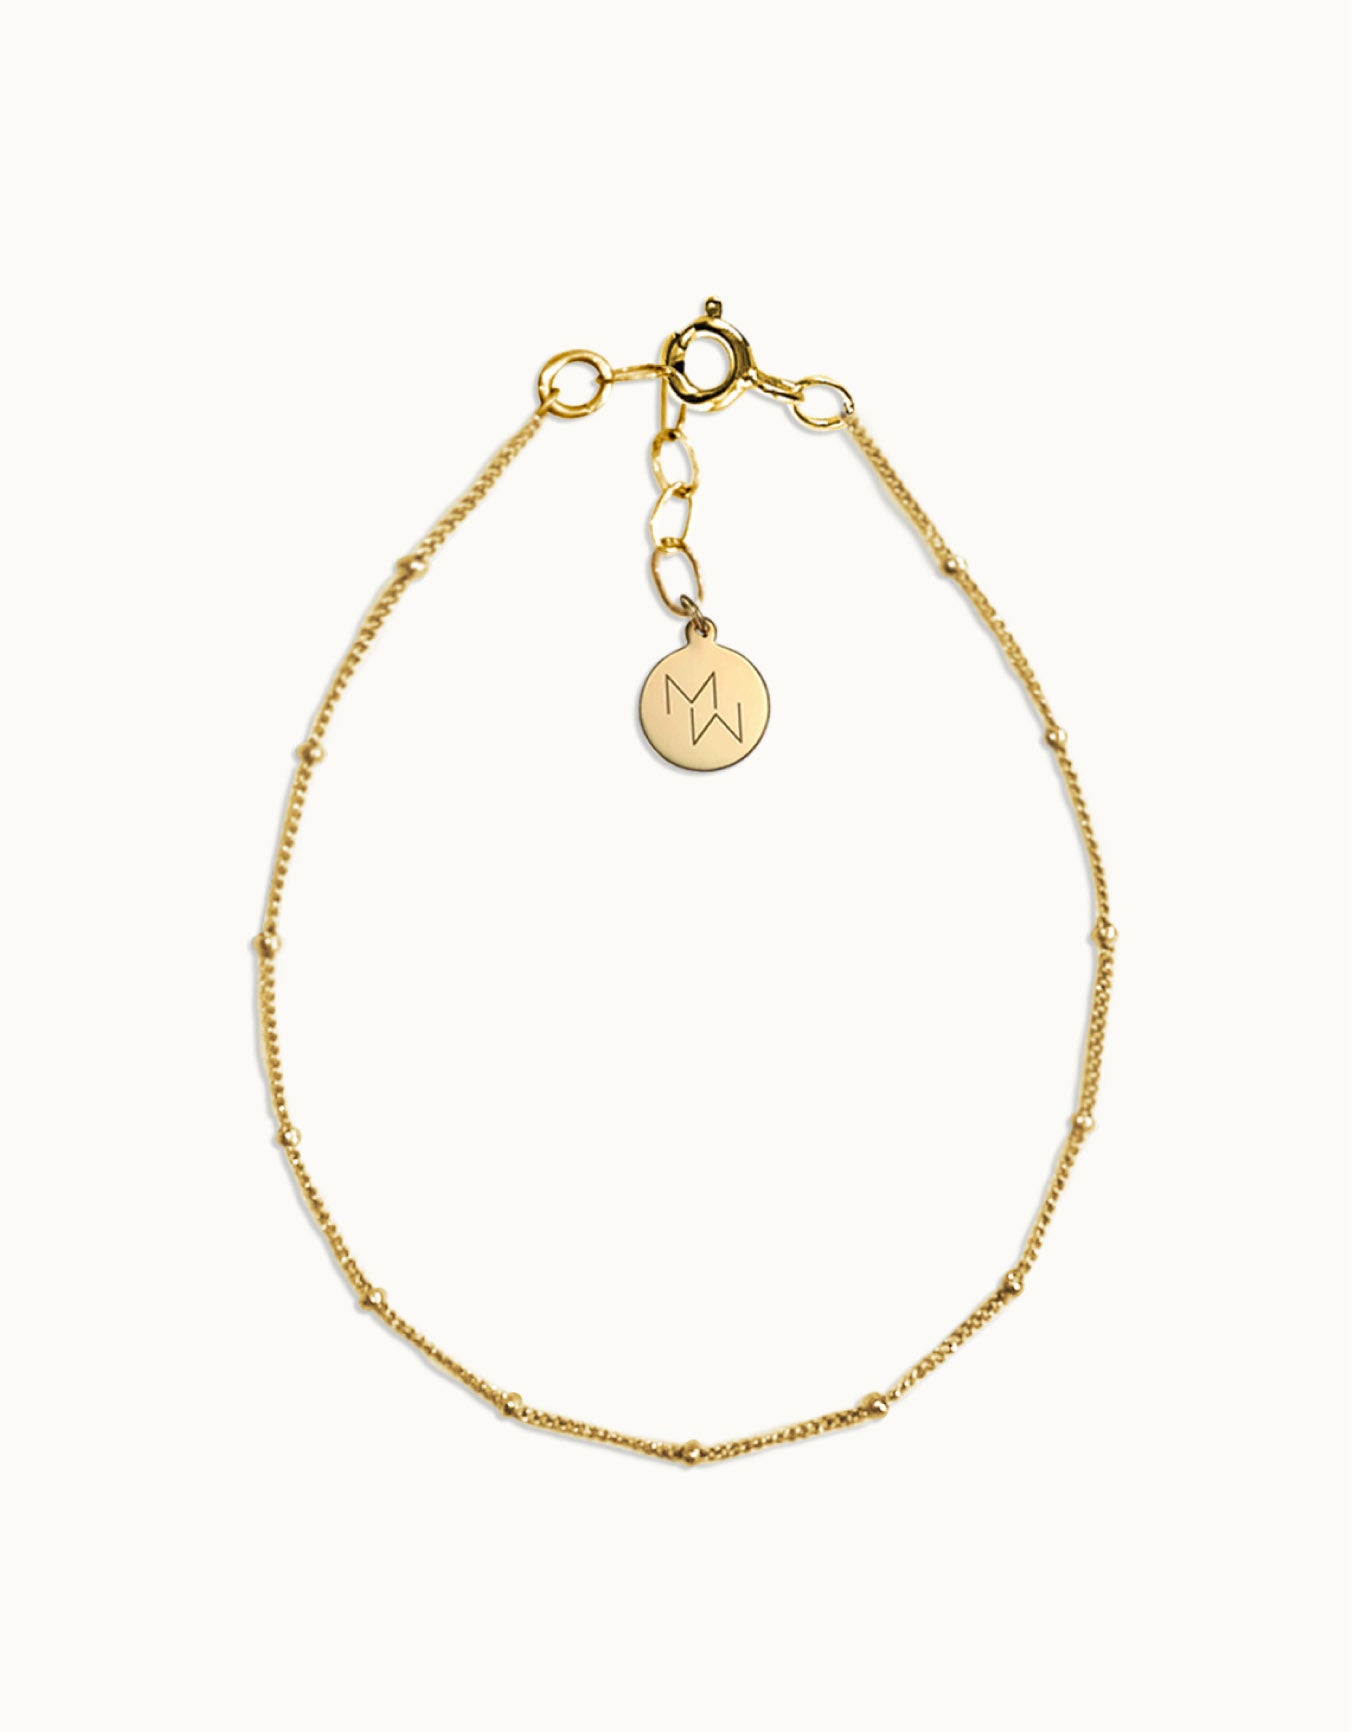 Blingvine - Gold Bracelet Designs for Daily Wear: A Must Add To Everyday  Wardrobe Gold is golden, and it remains so no matter how many times you  wear it or if you